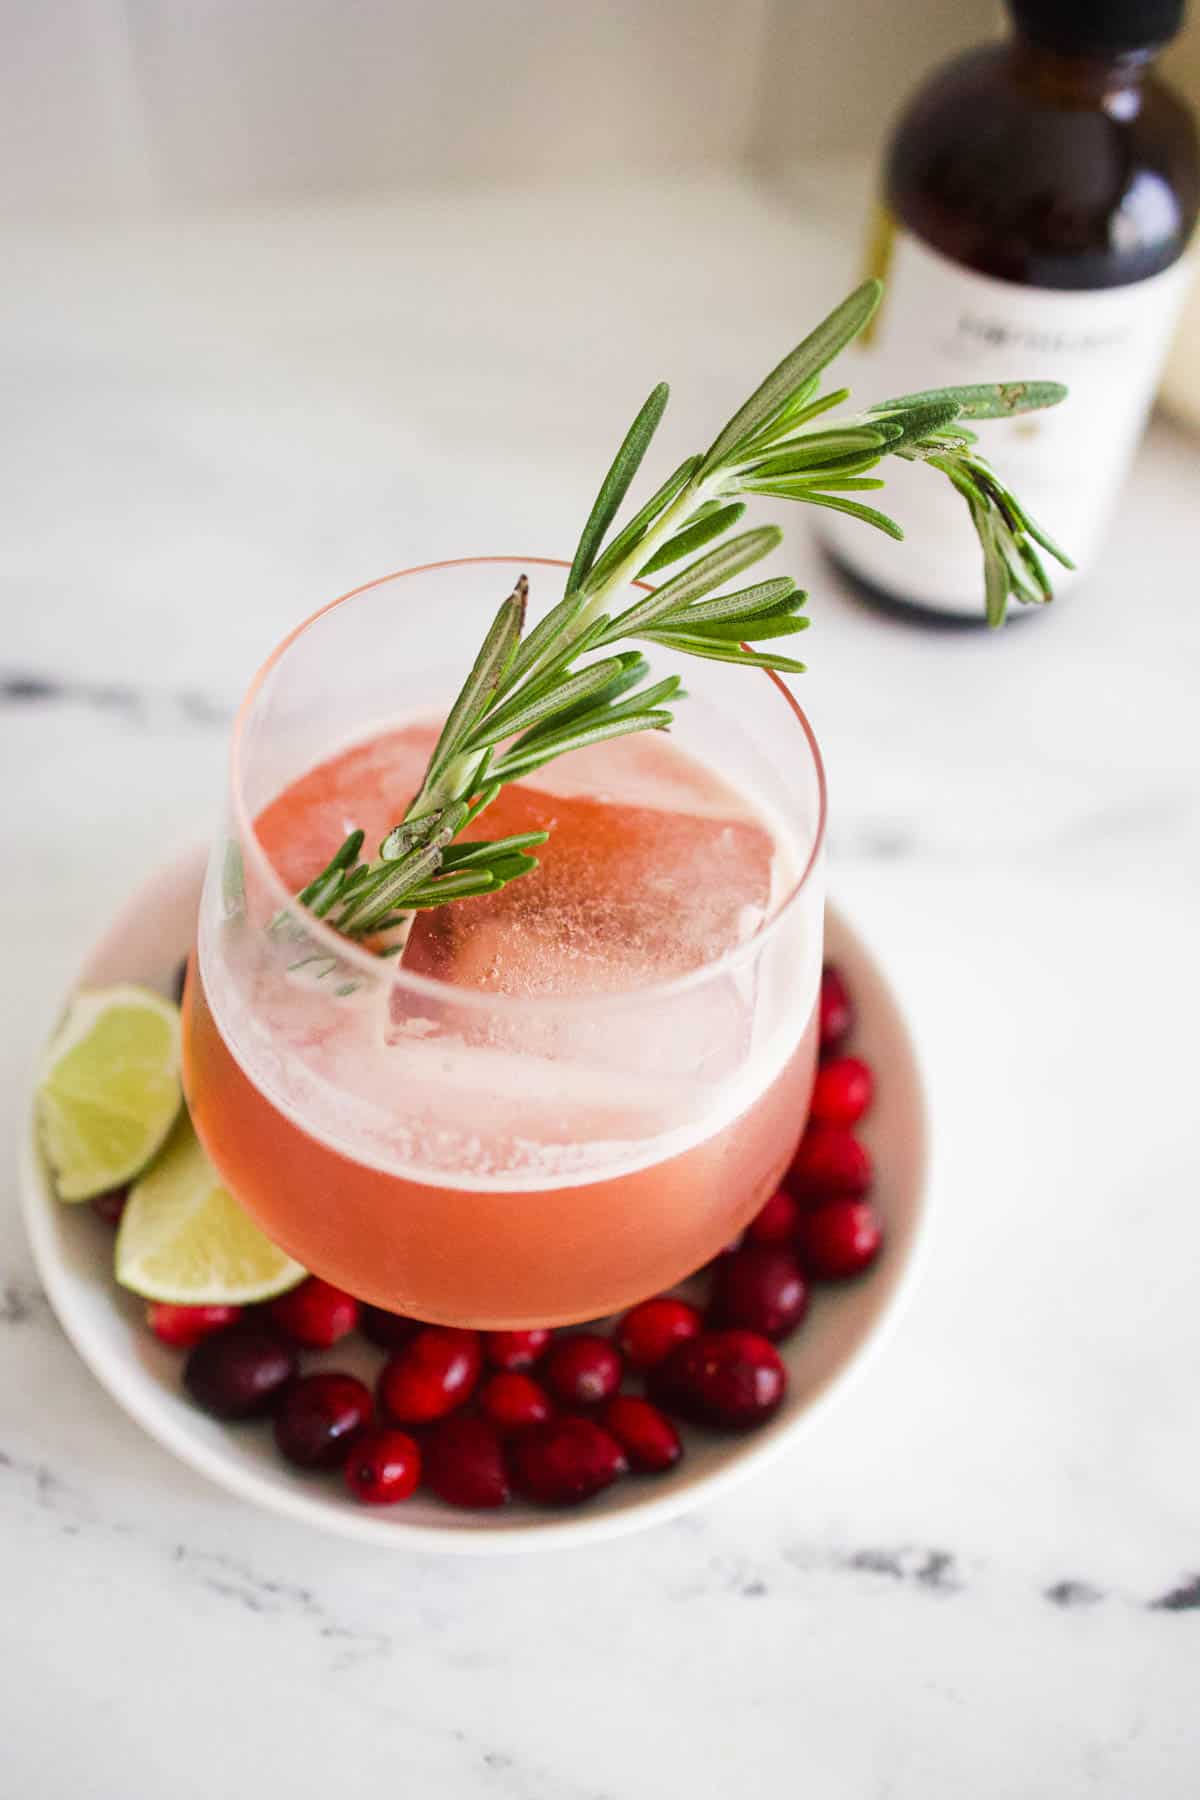 A cranberry old fashioned cocktail sitting on a plate of fresh cranberries with a rosemary garnish.